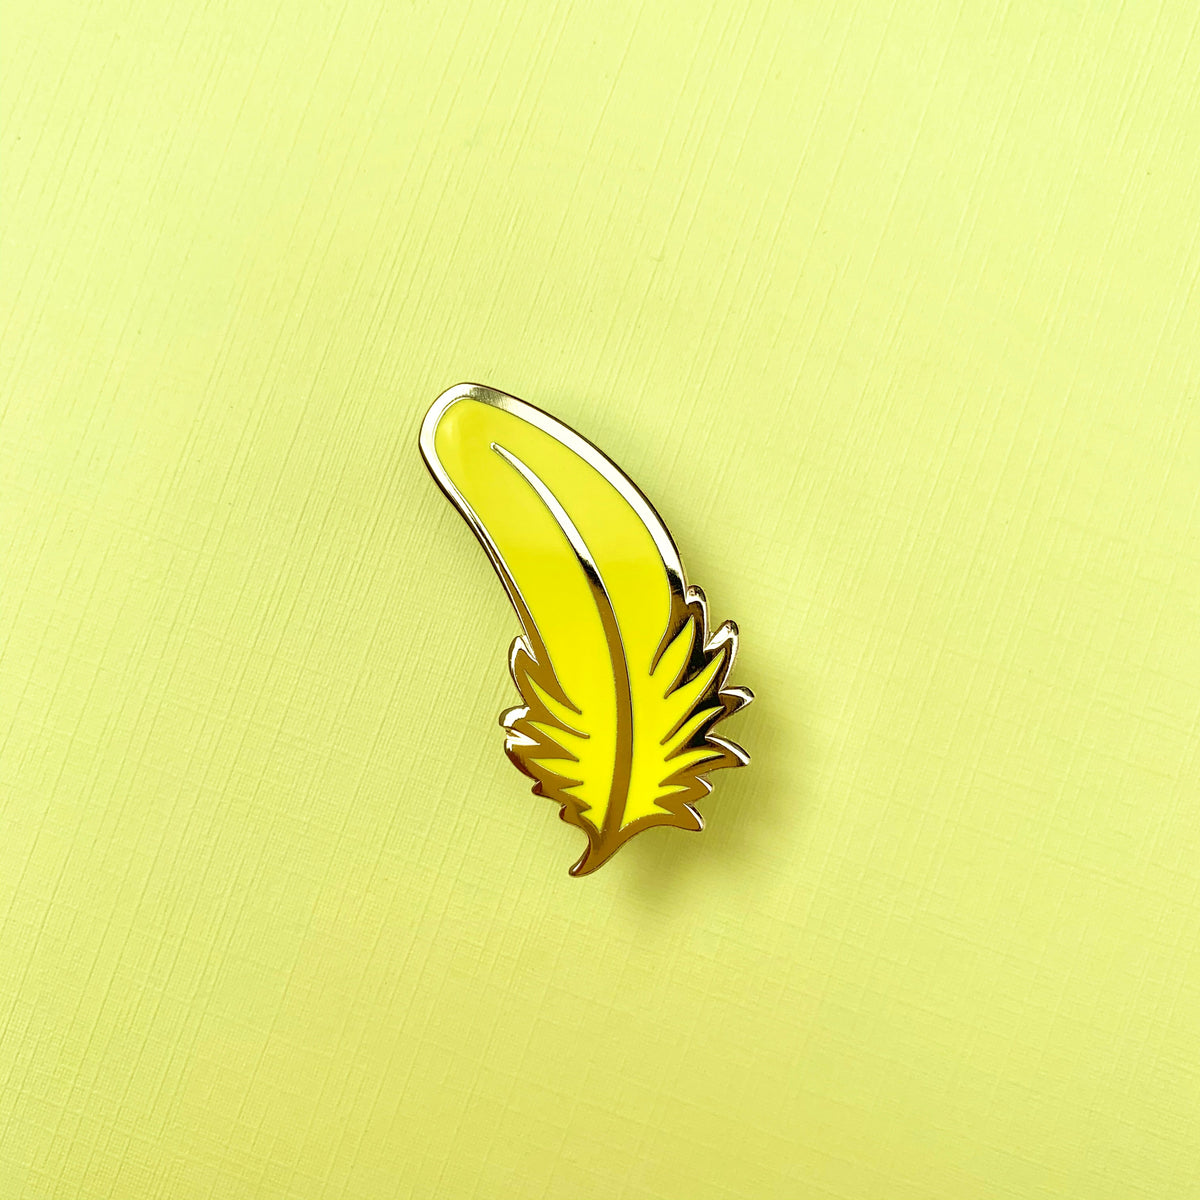 Chocobo Feather Enamel Pin by Shumi Collective